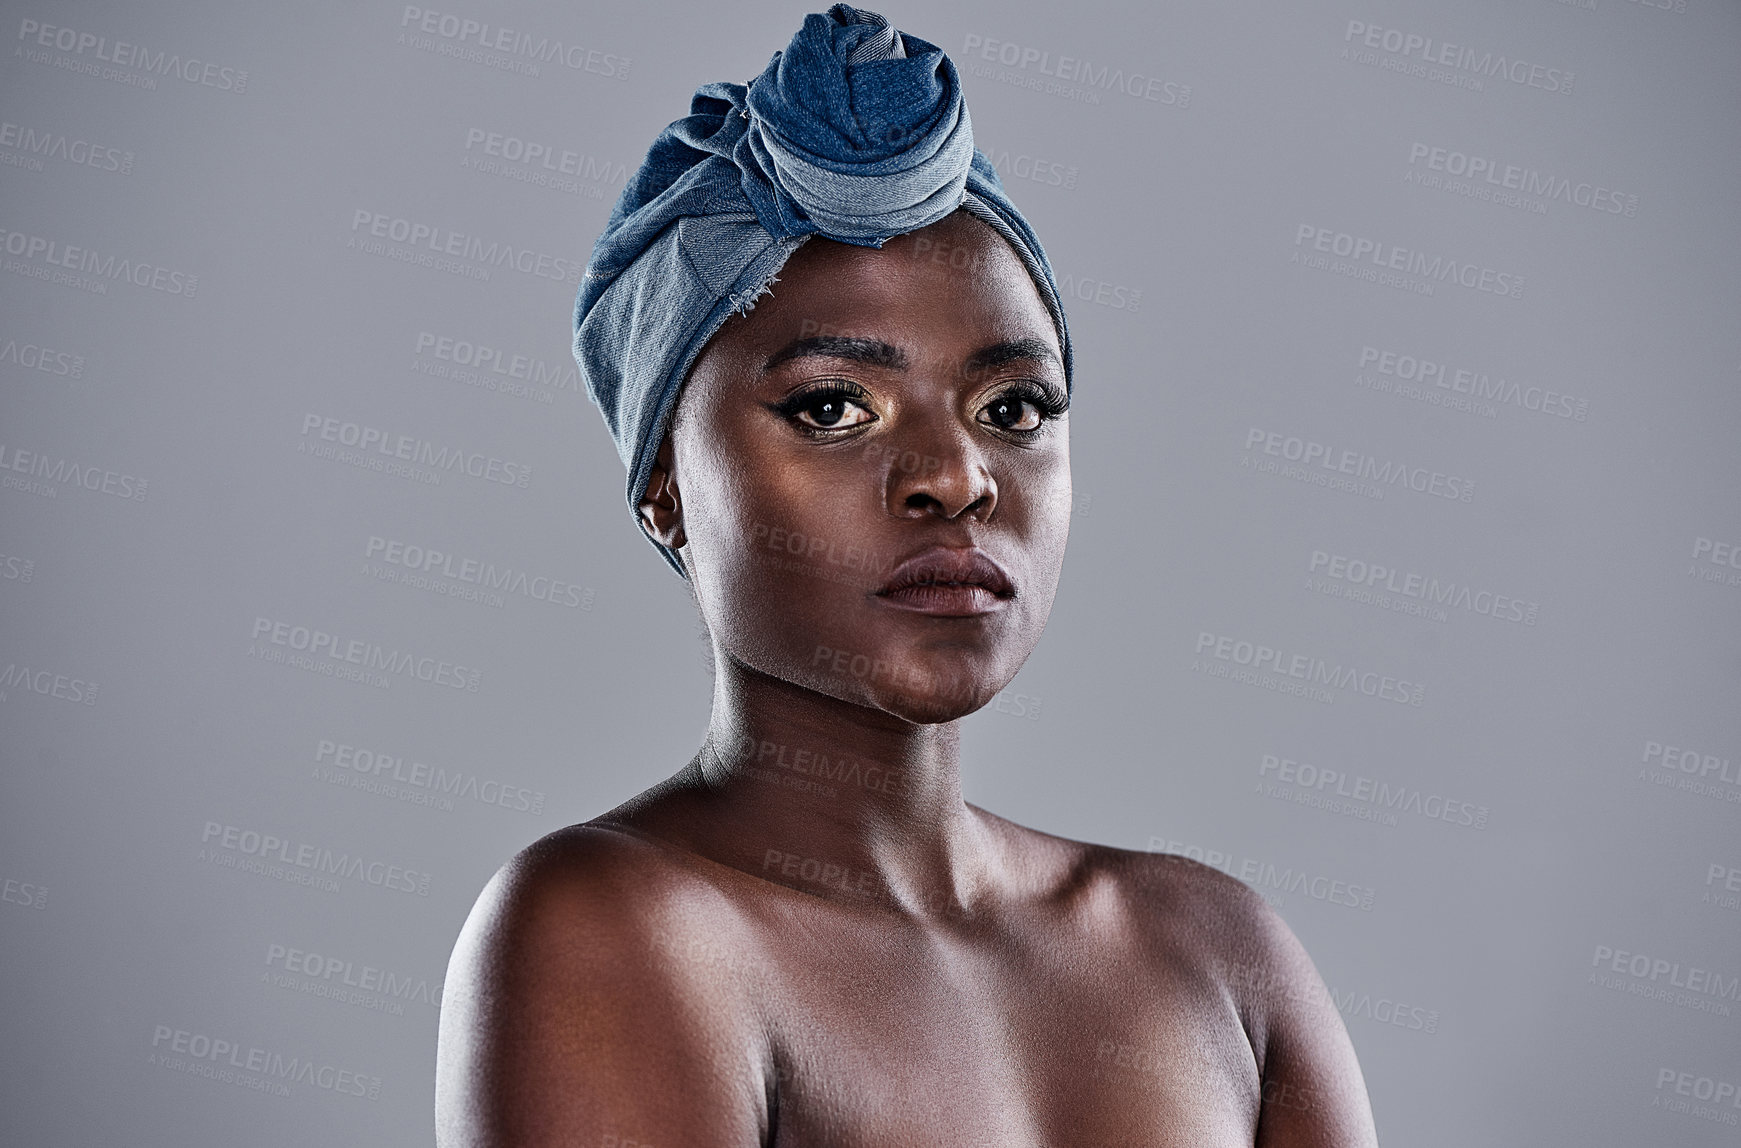 Buy stock photo Shot of a beautiful young woman wearing a denim head wrap while posing against a grey background